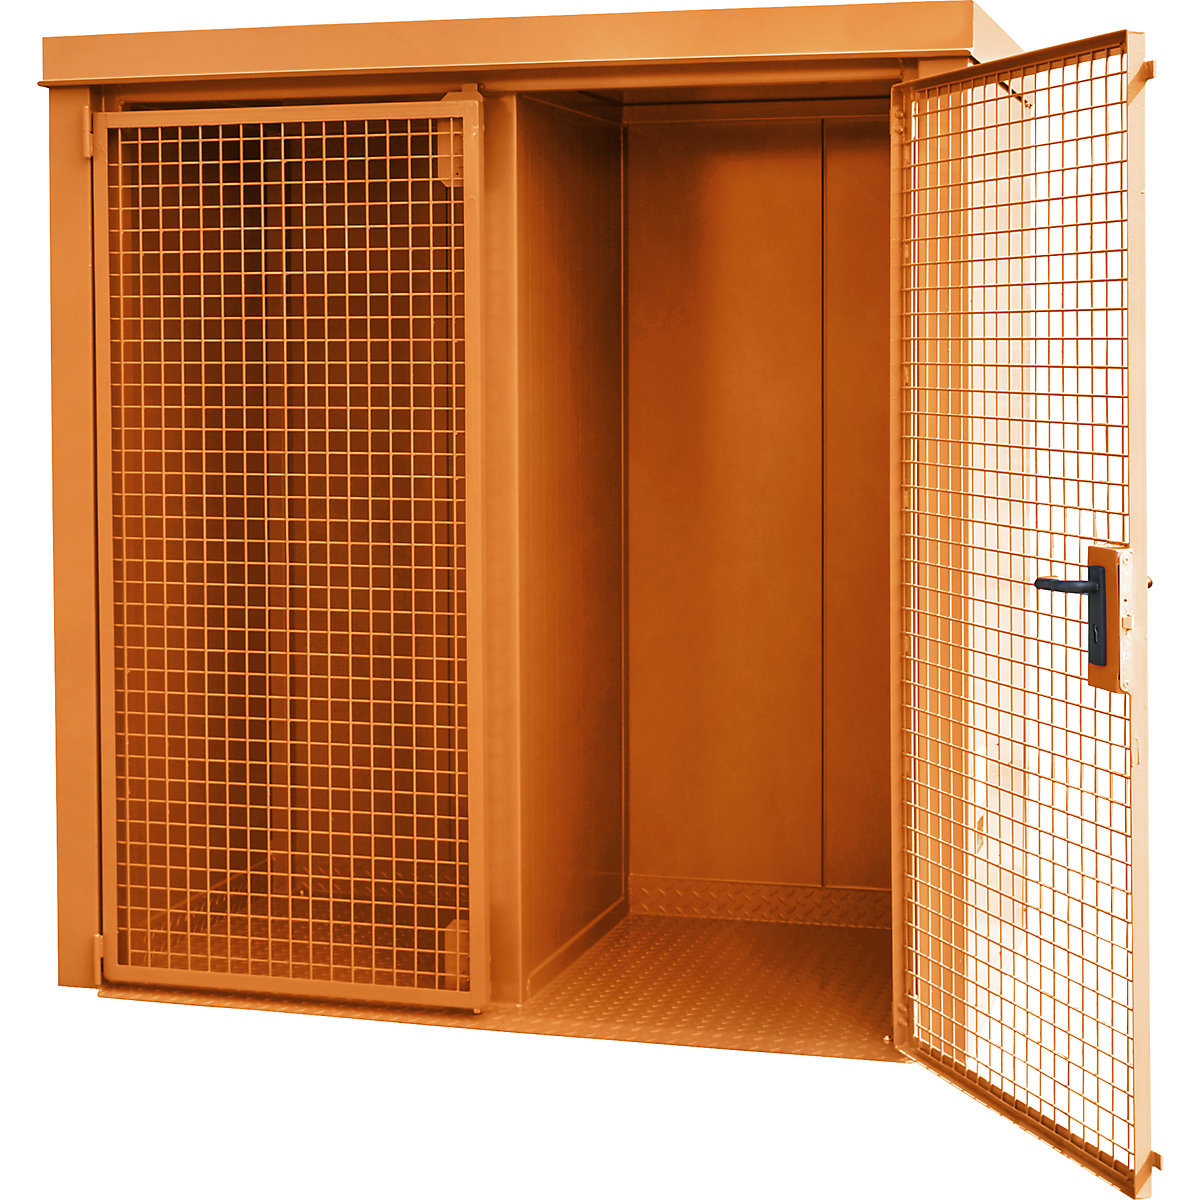 Gas cylinder container with divider, fire resistant – eurokraft pro, for 28 cylinders with Ø 230 mm, orange-6